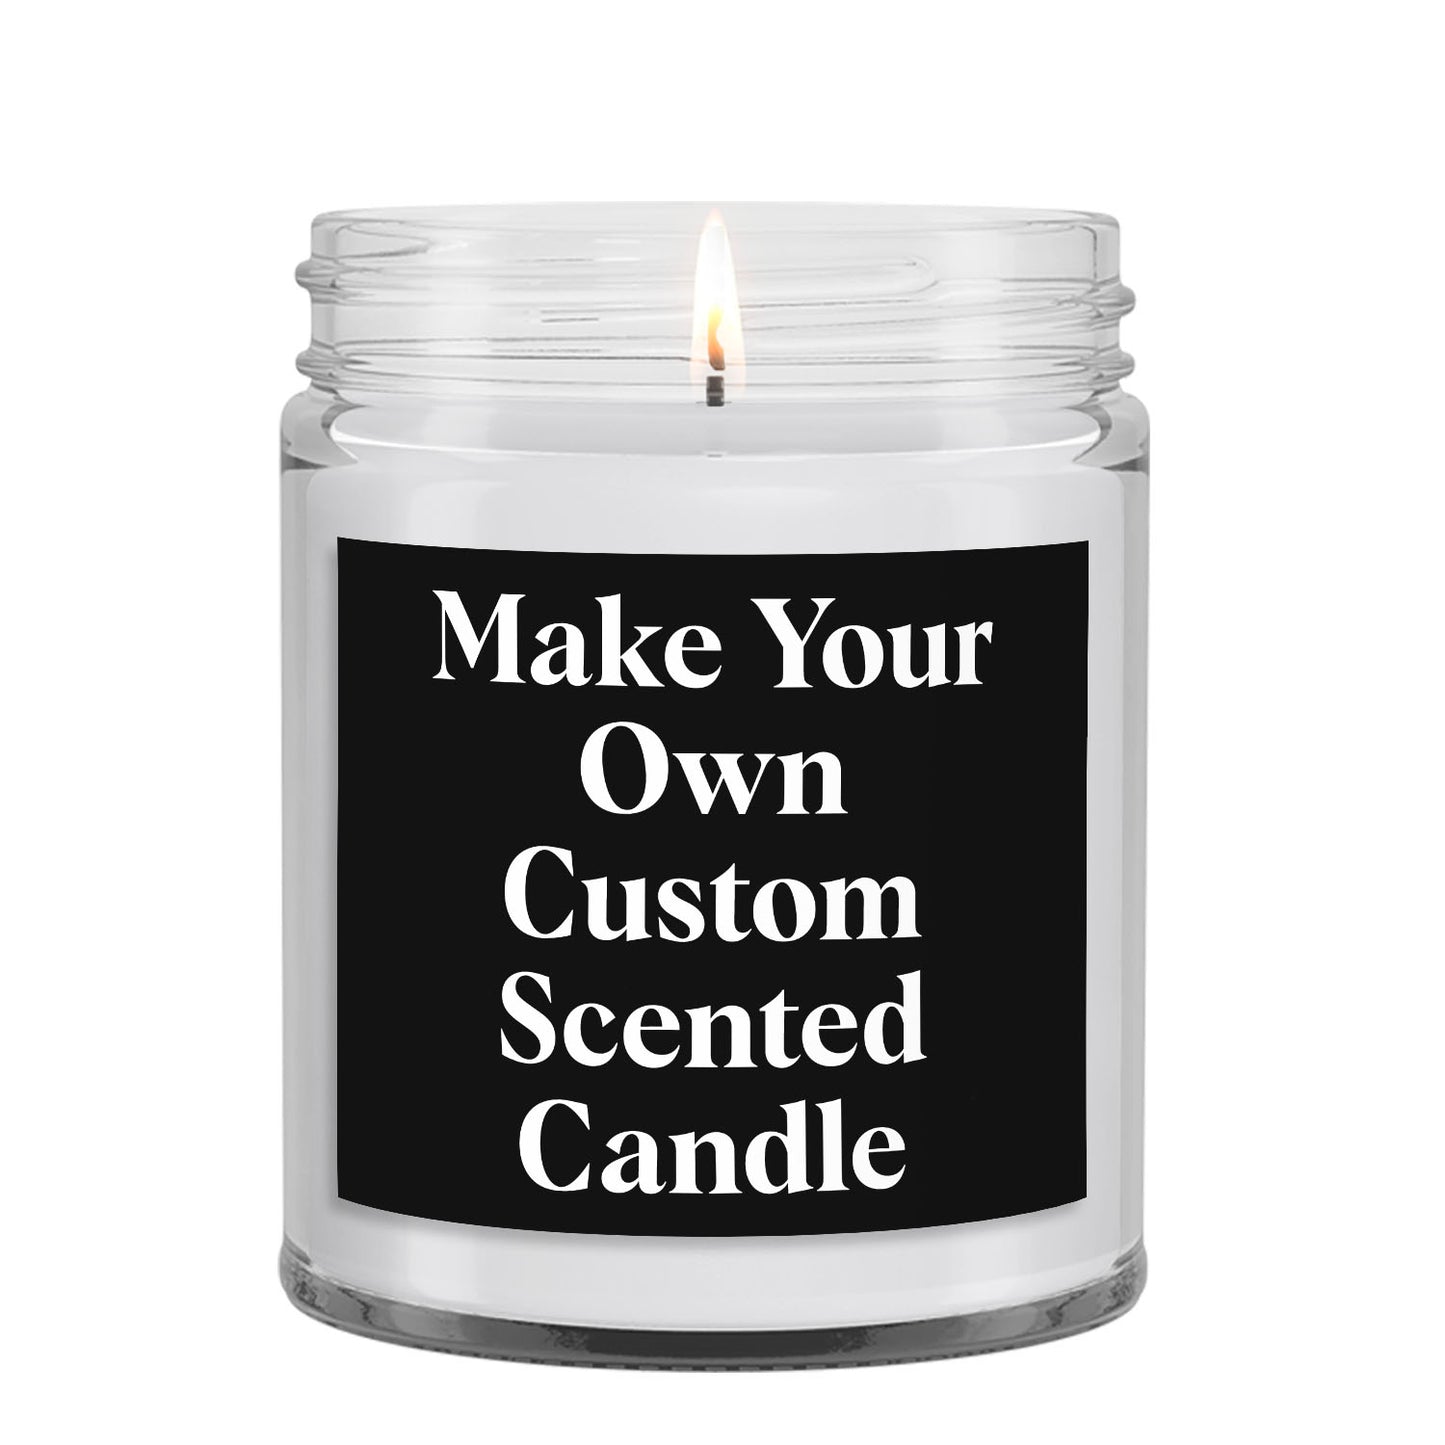 Use Your Own Image + Create a Custom Scented 8oz Candle